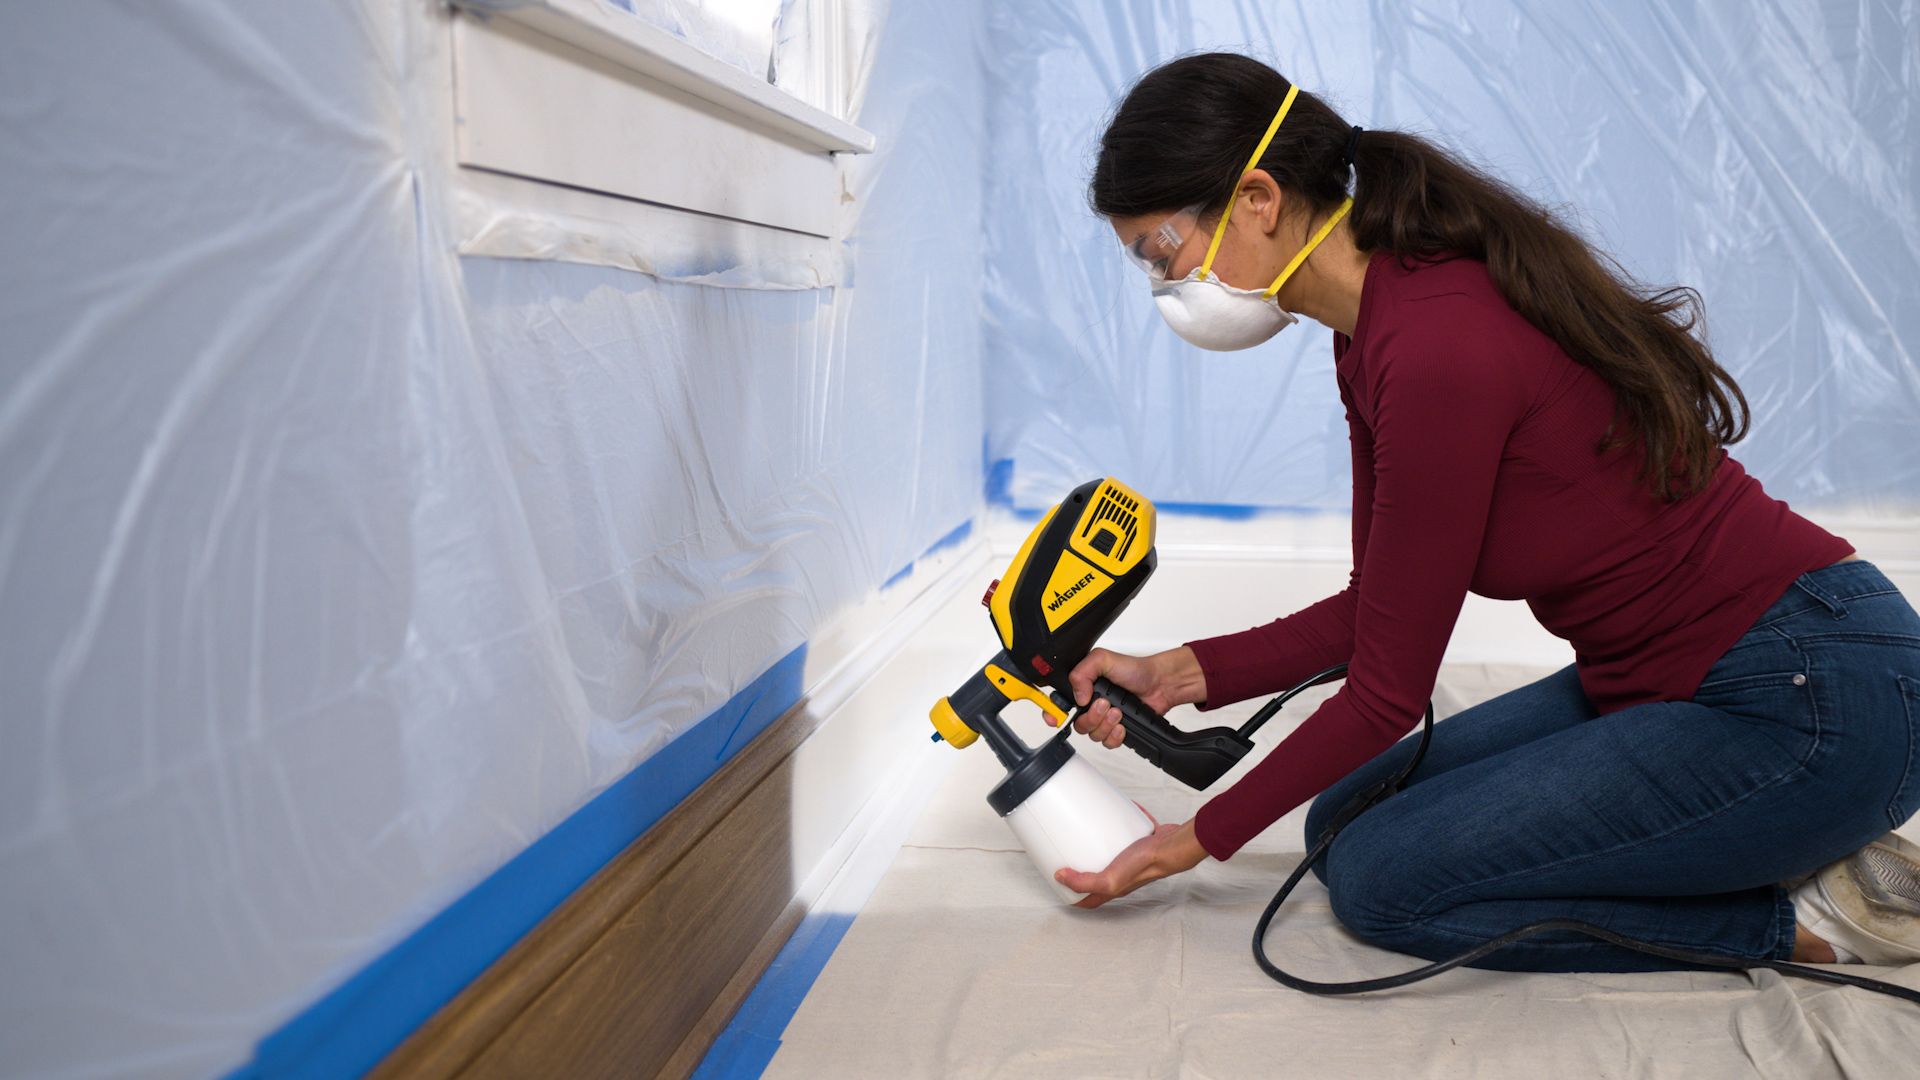 All About How (and Why) to Use a Paint Sprayer To Paint Your Home